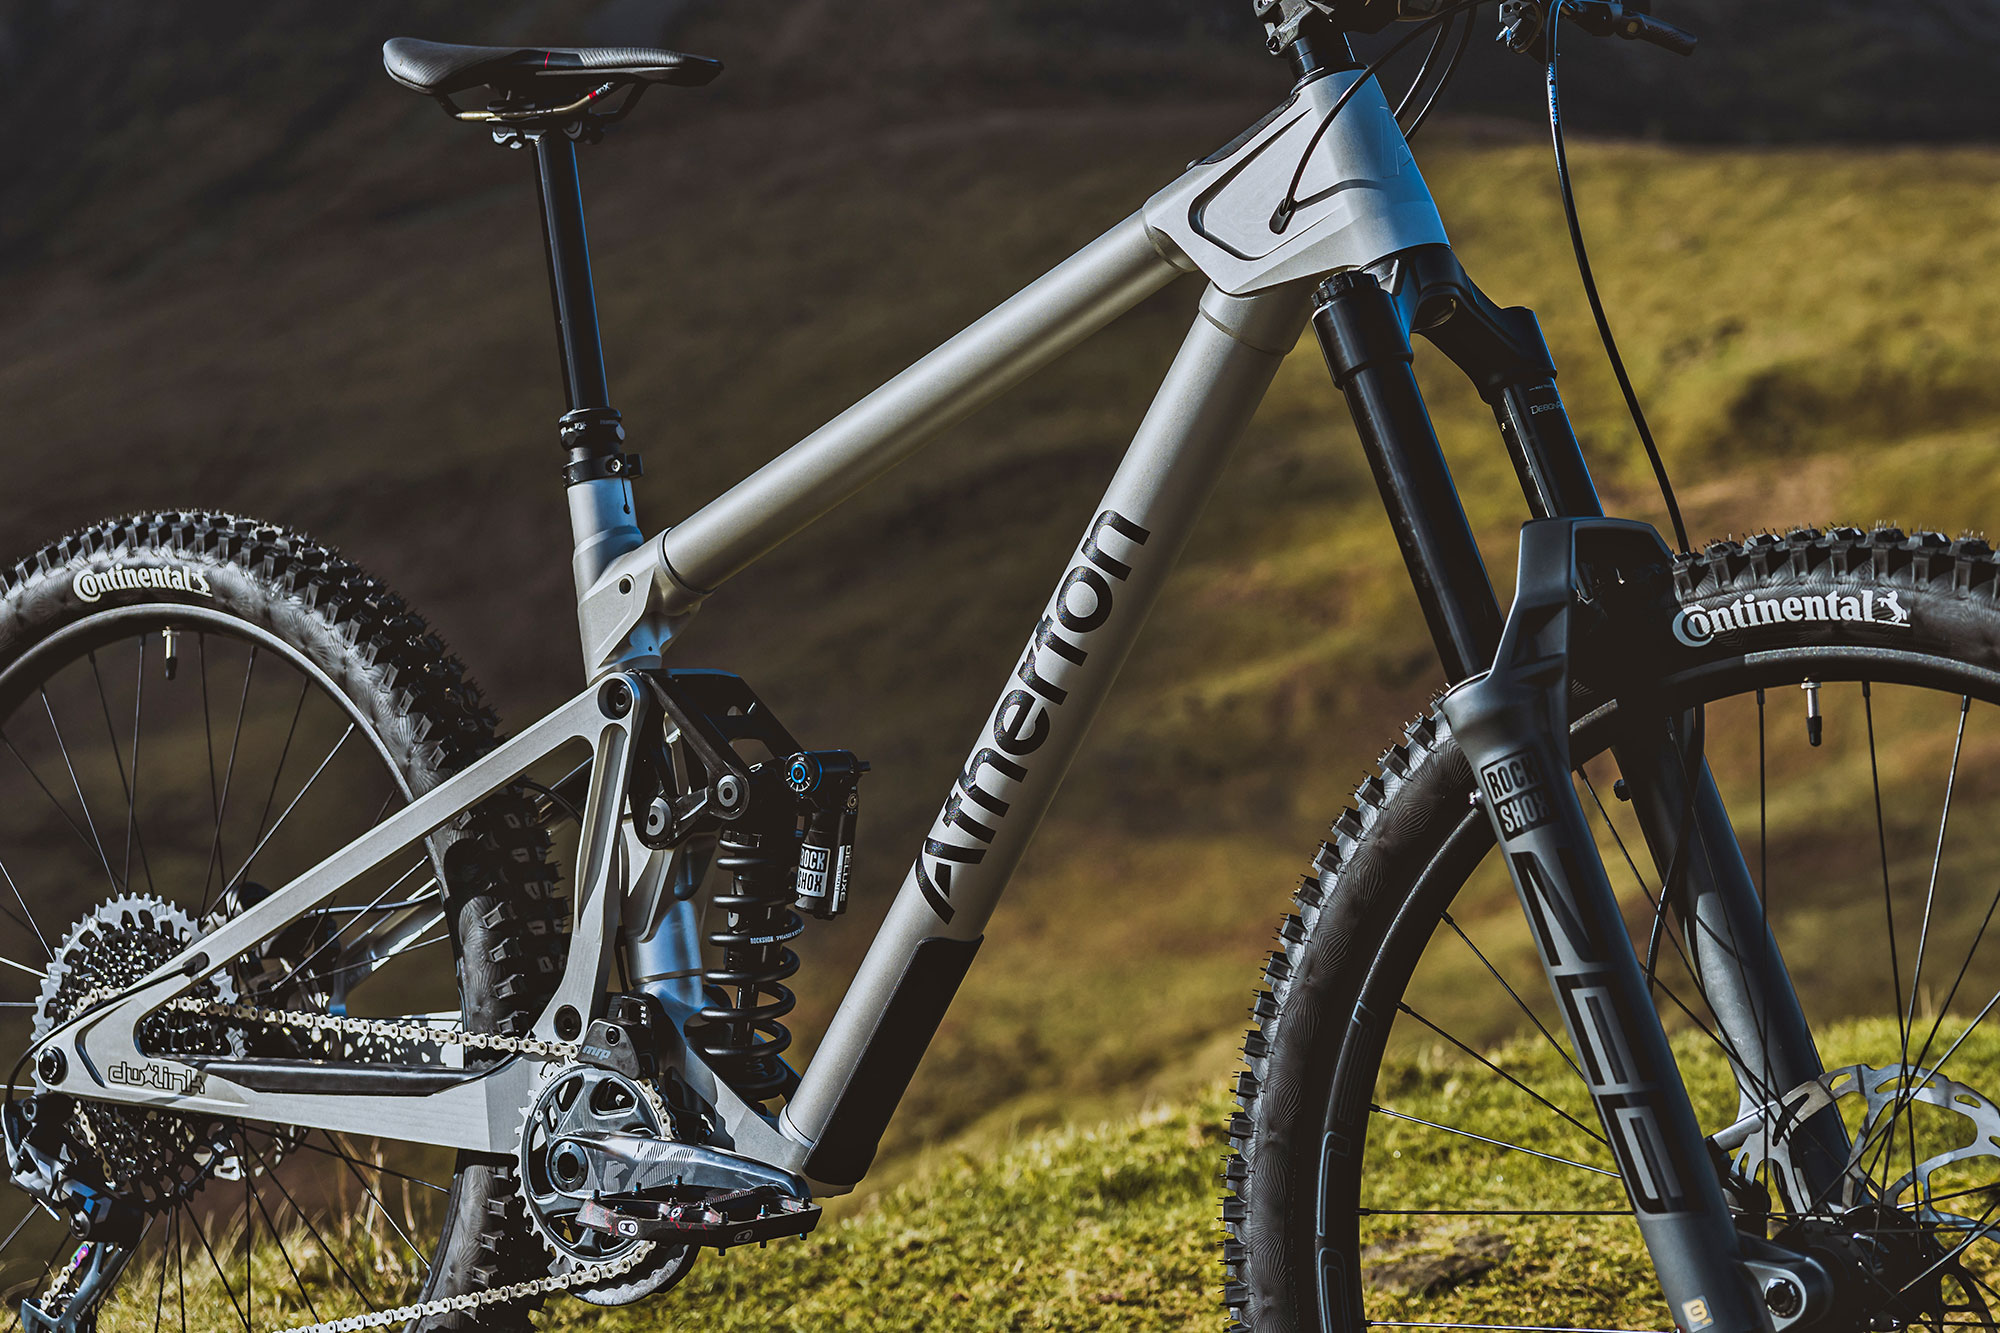 Lugged Atherton S170 Alloy Enduro Bike for the Price of a 3D-Printed Carbon & Ti Frame